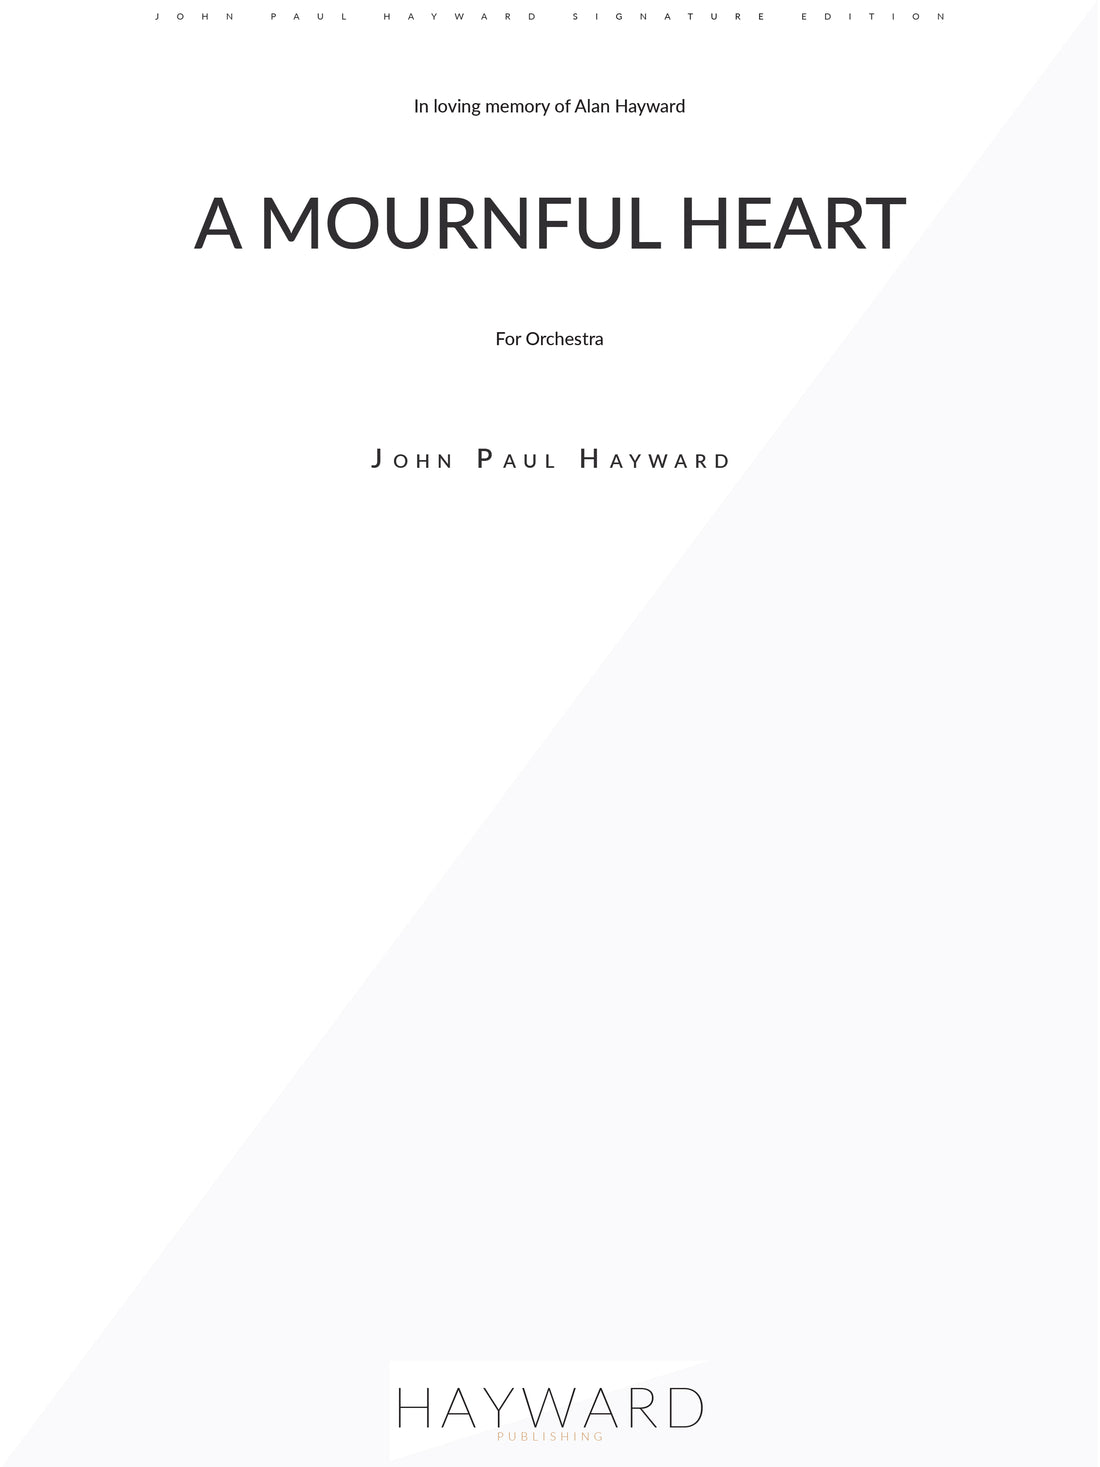 A Mournful Heart